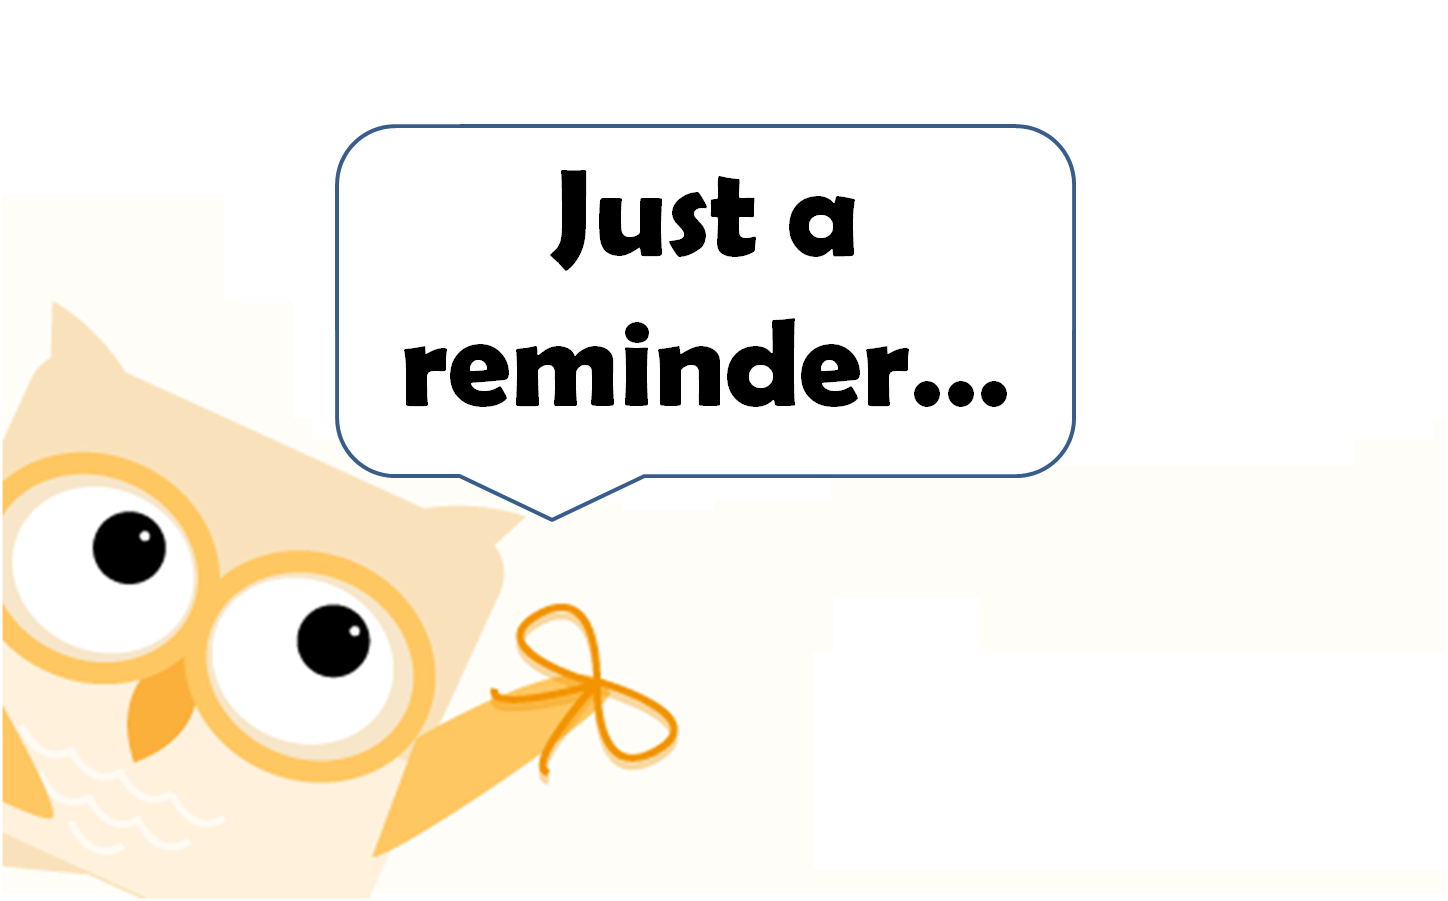 Pto meeting reminder clipart.